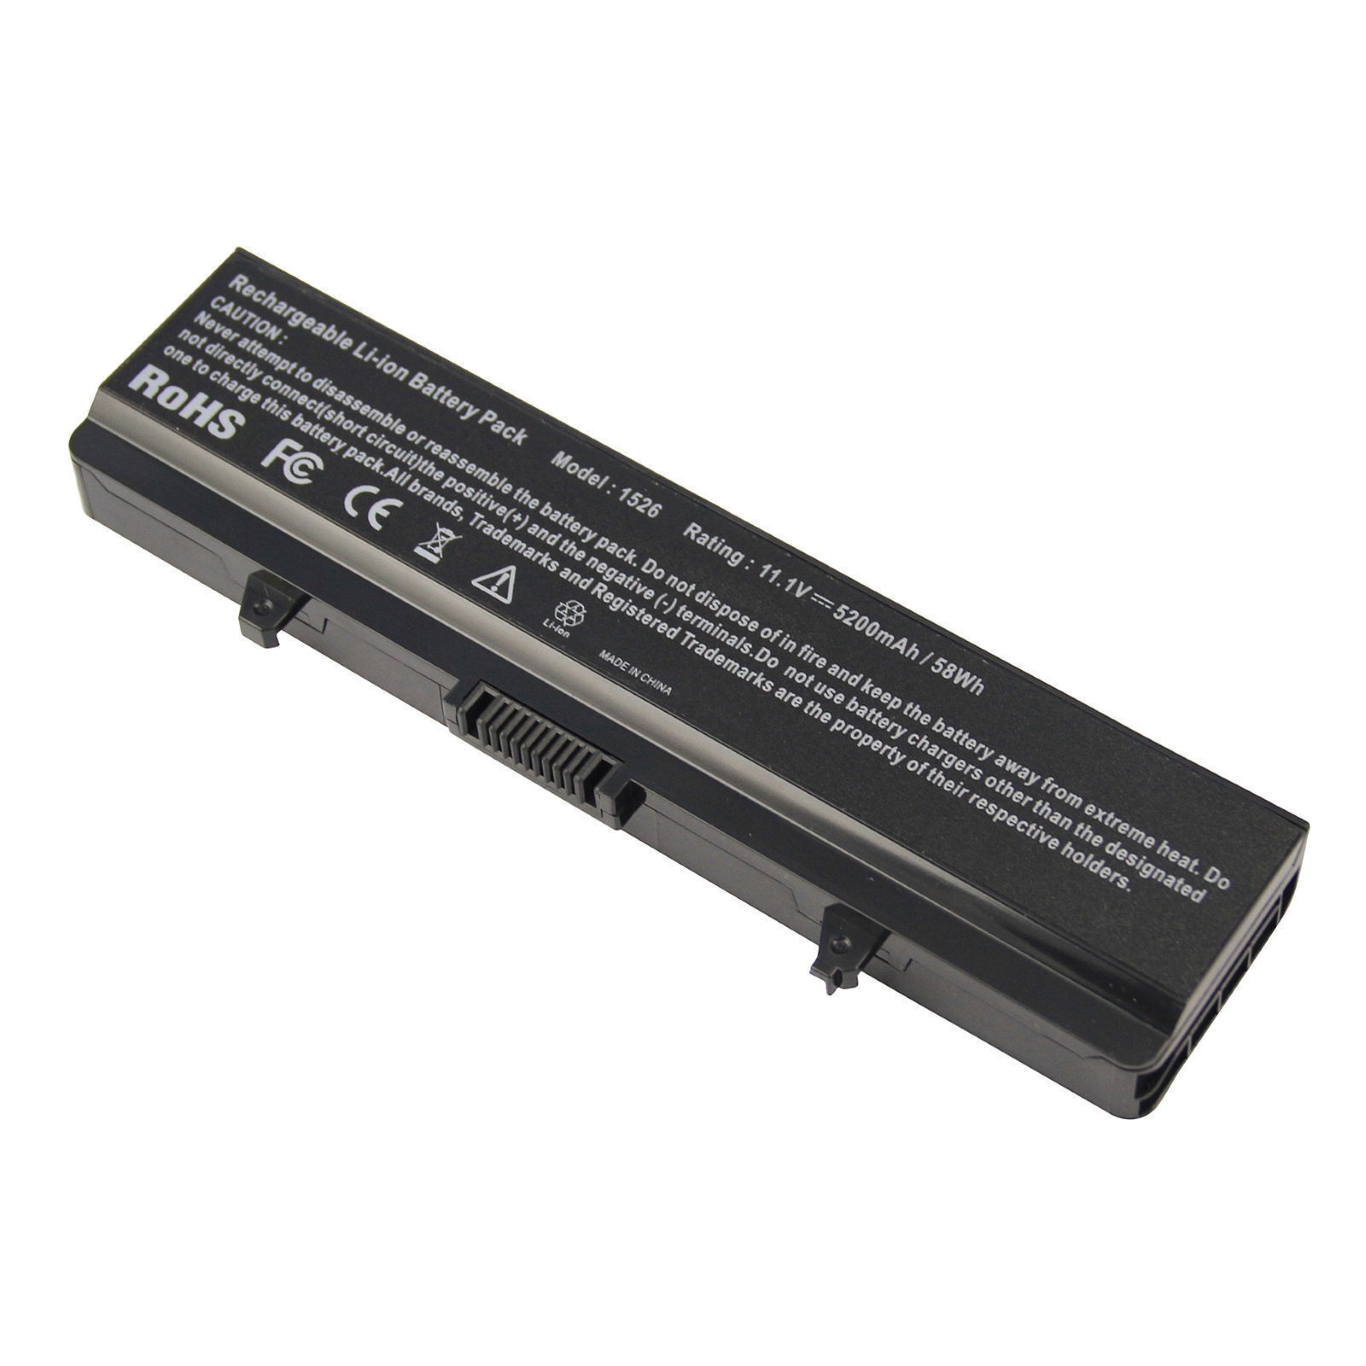 0C601H, 0CR693 replacement Laptop Battery for Dell Inspiron 14 1440, Inspiron 1525, 6 cells, 11.1 V, 5200 Mah